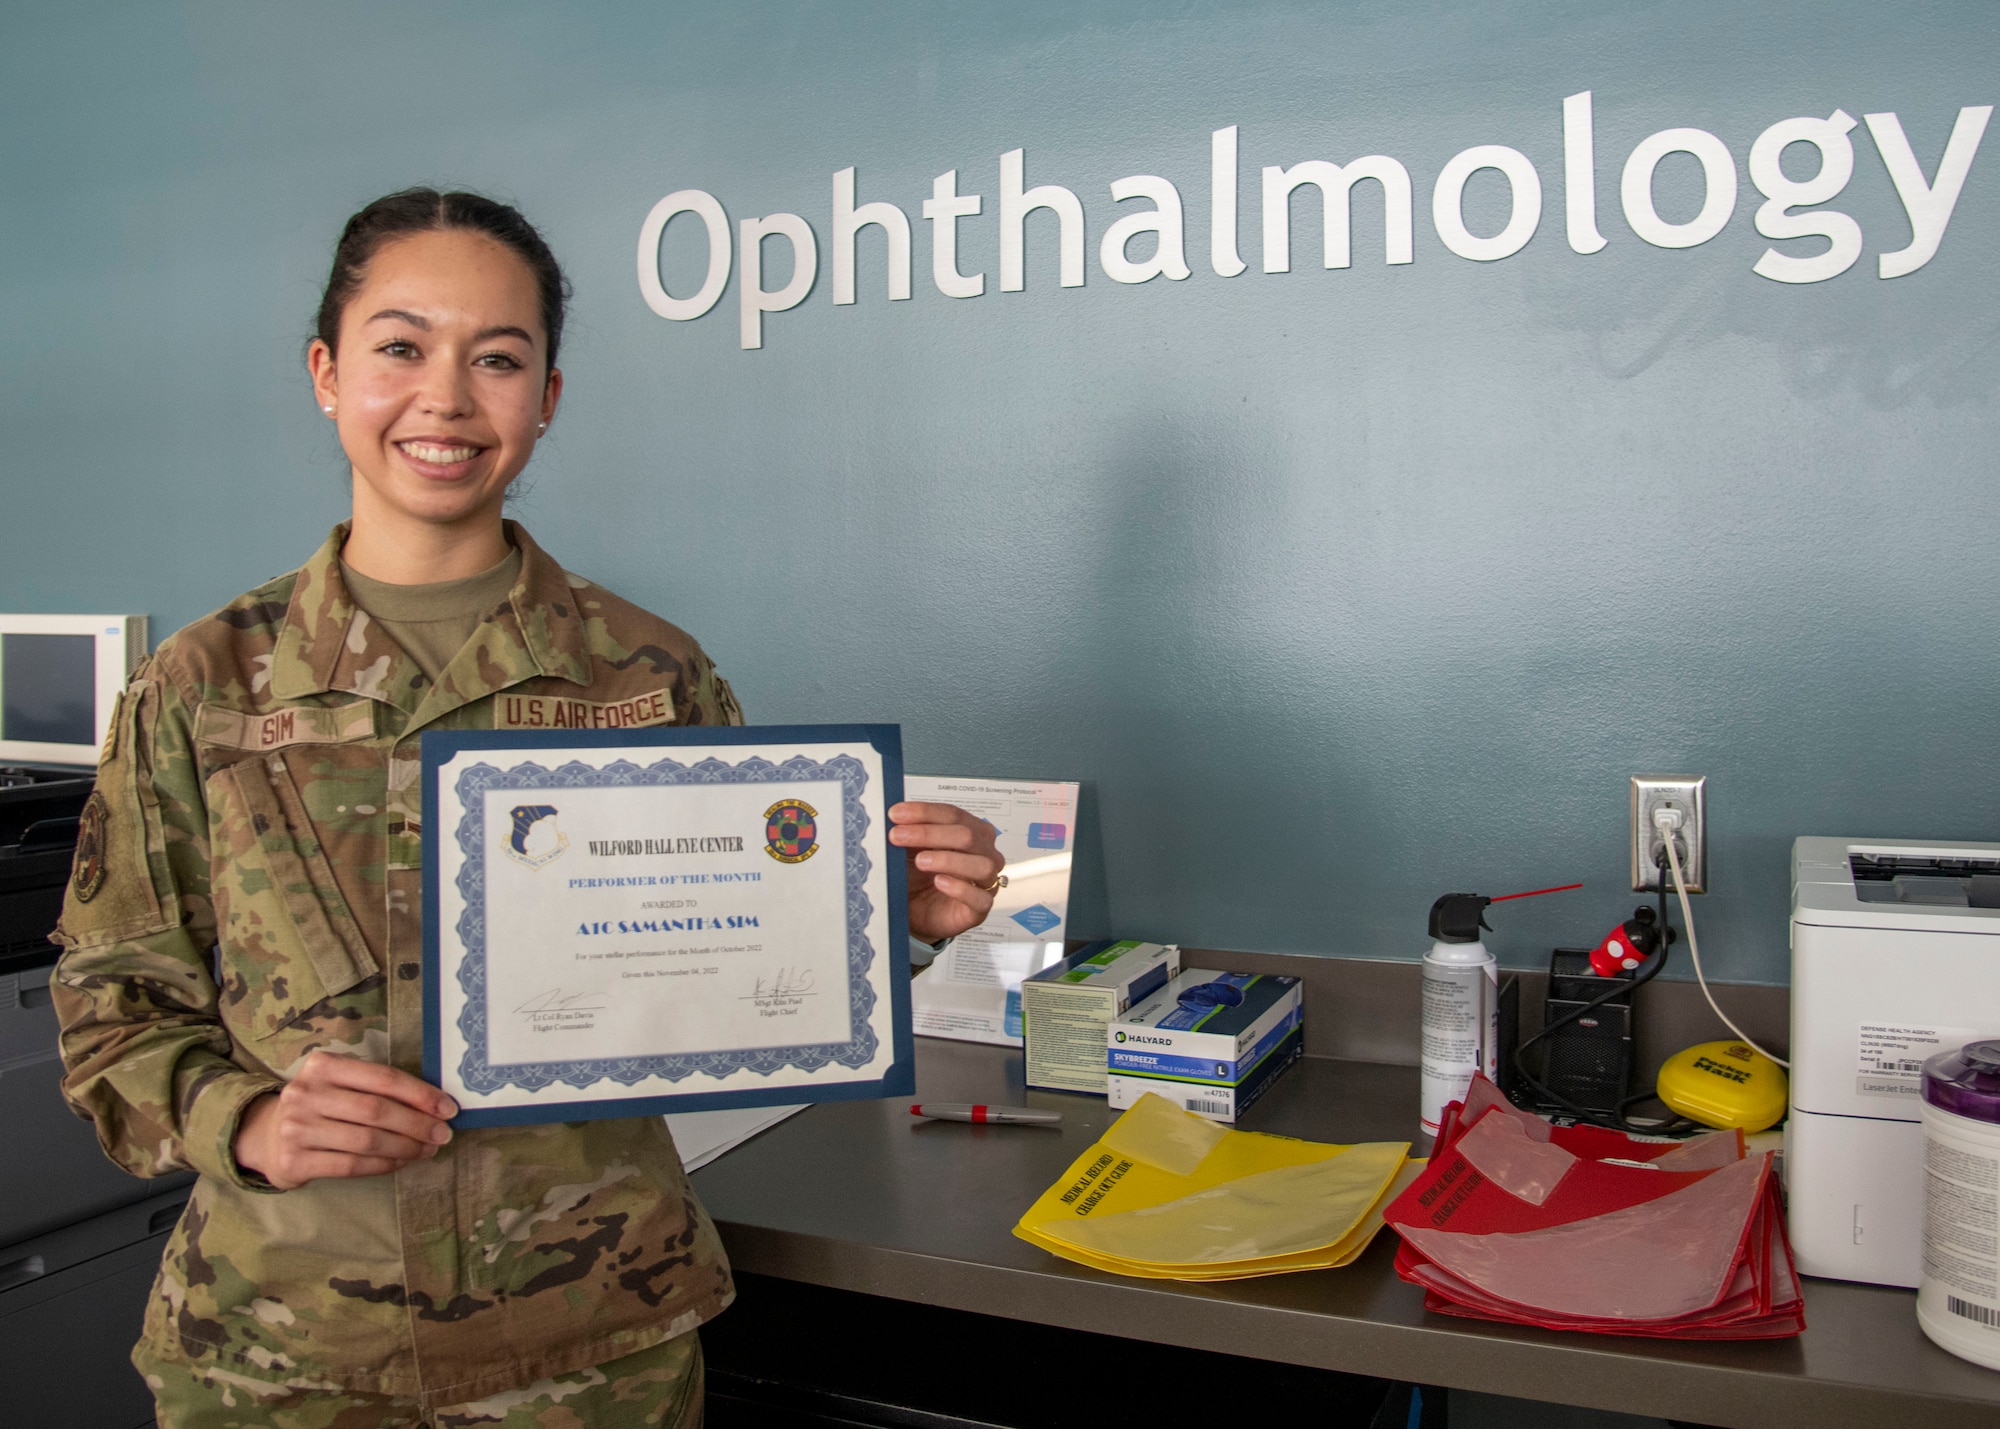 Airman 1st Class Samantha Sim, 59th Surgical Operations Squadron ophthalmic technician, poses for a photo at the Ophthalmology Clinic in Wilford Hall Ambulatory Surgical Center, Joint Base San Antonio-Lackland, Jan. 19, 2023. The 59th SGC tests and treats to prevent vision loss, promote a better quality of life and support a worldwide qualified force. (U.S. Air Force photo by Senior Airman Melody Bordeaux)